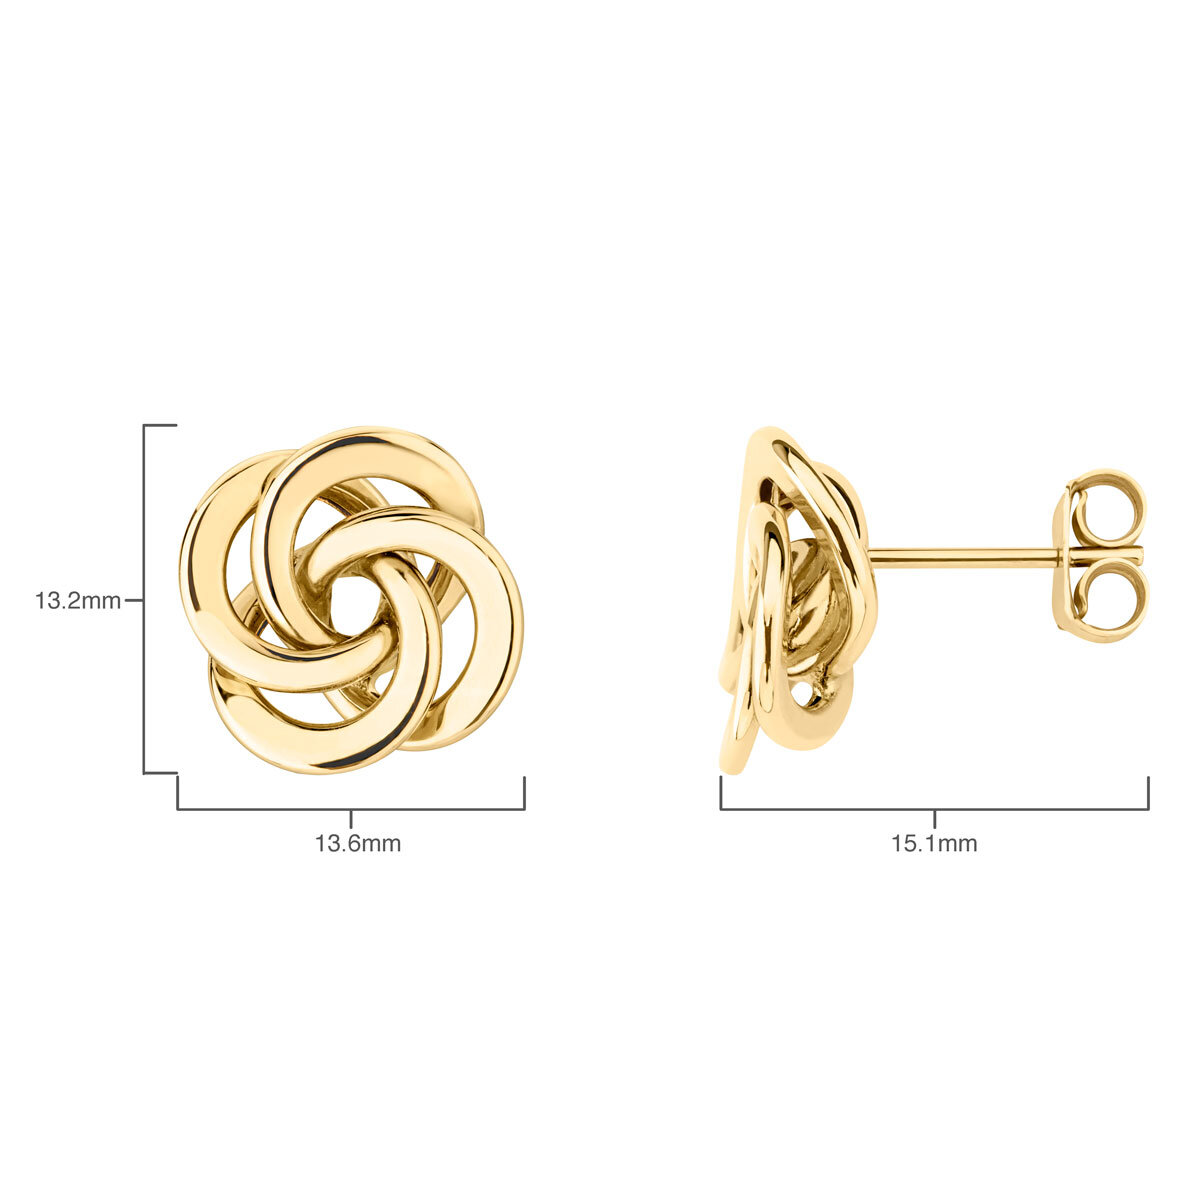 14ct Yellow Gold Large Love Knot Earrings